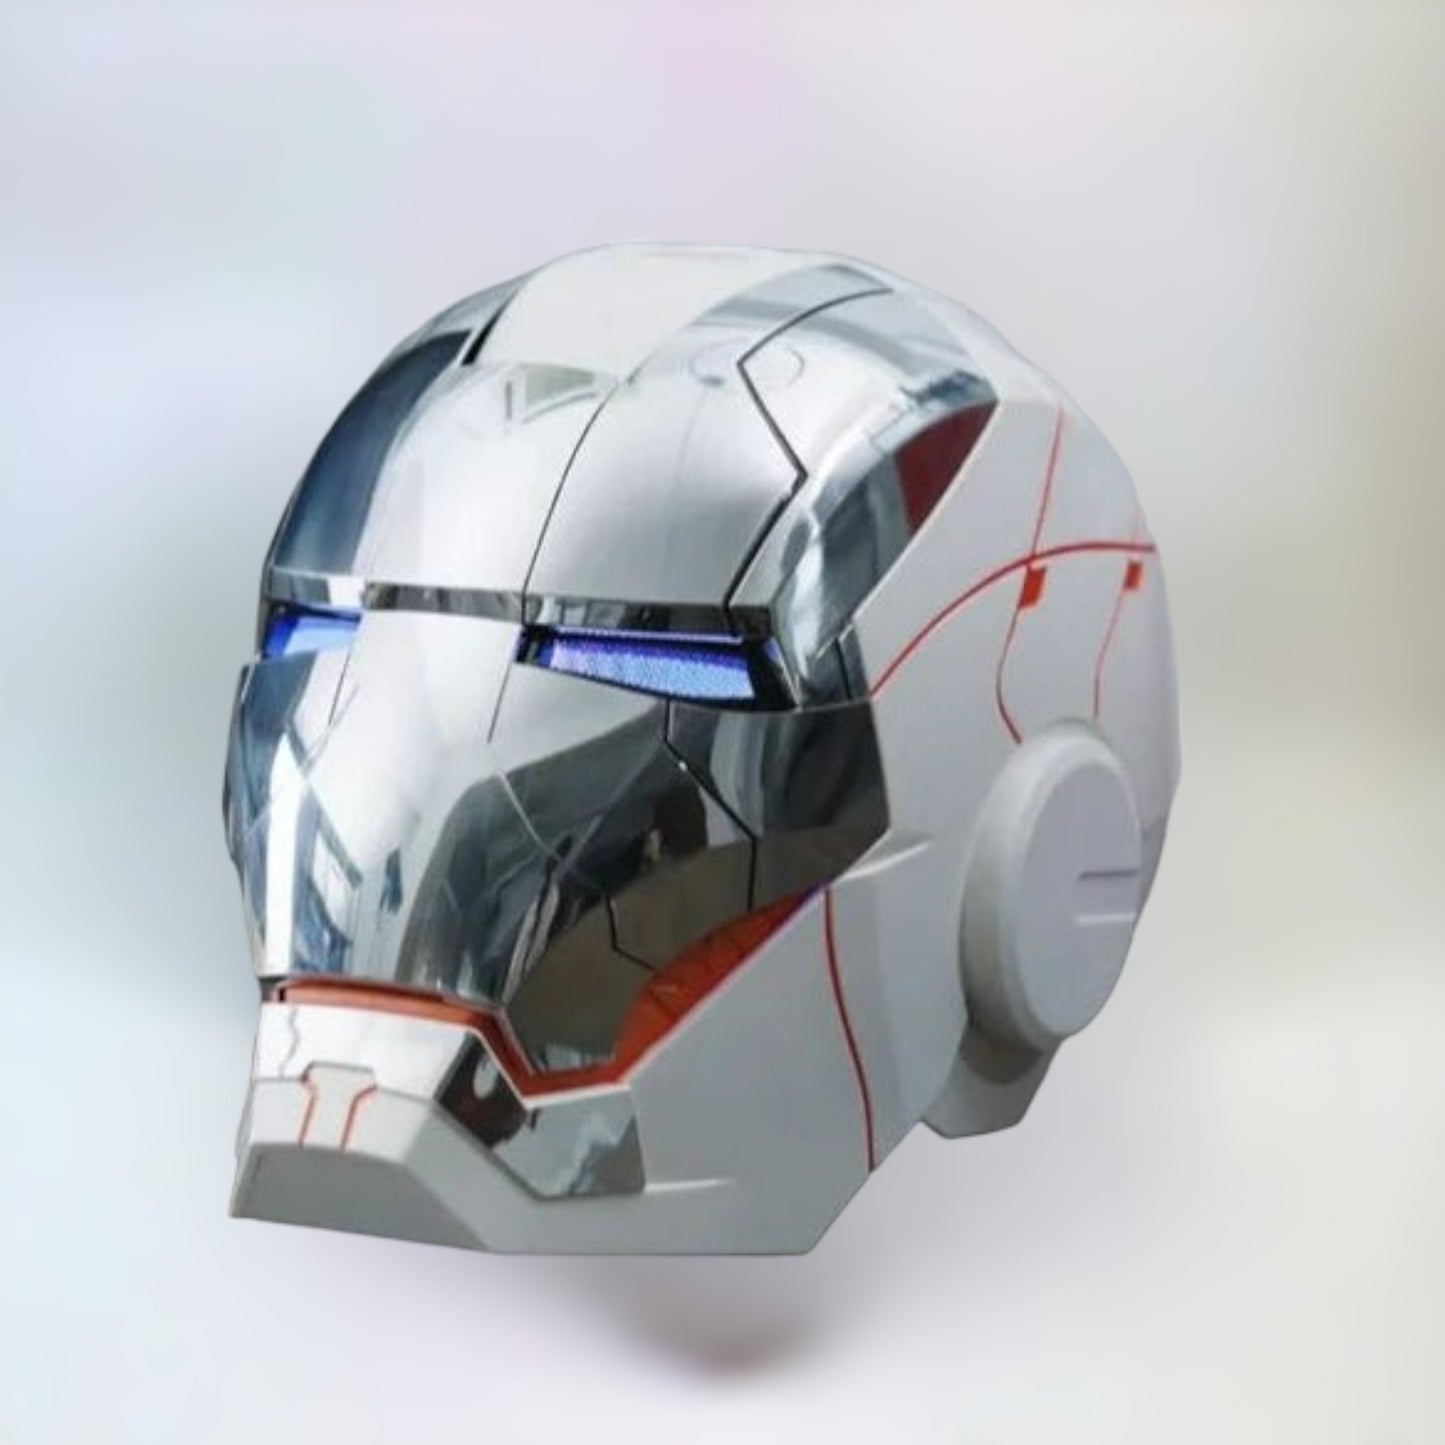 Iron Man Helmet MK5 White Edition with Jarvis Voice Control and Blue Eyes on a plain white background.